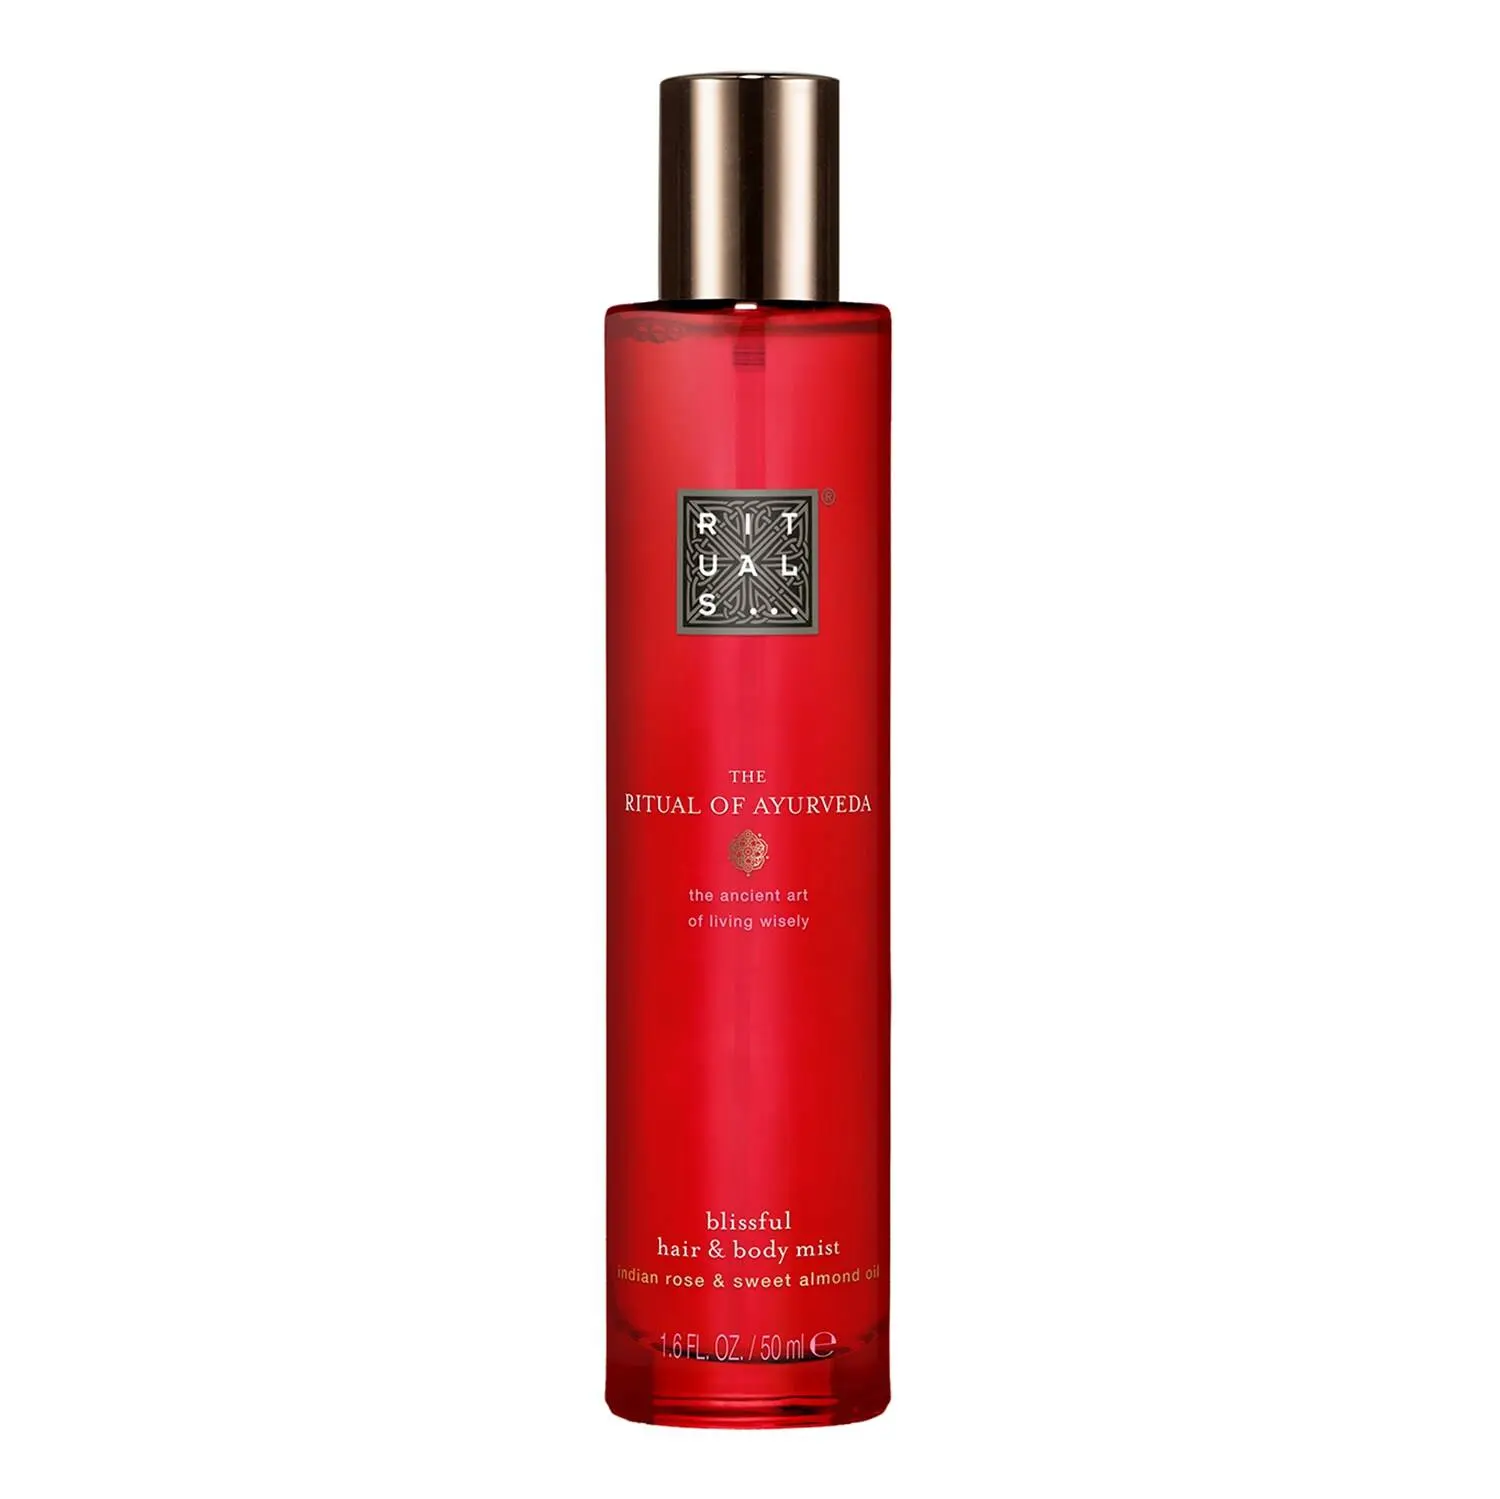 Rituals The Ritual of Ayurveda Hair & Body Mist 50 ml Discounts and Cashback